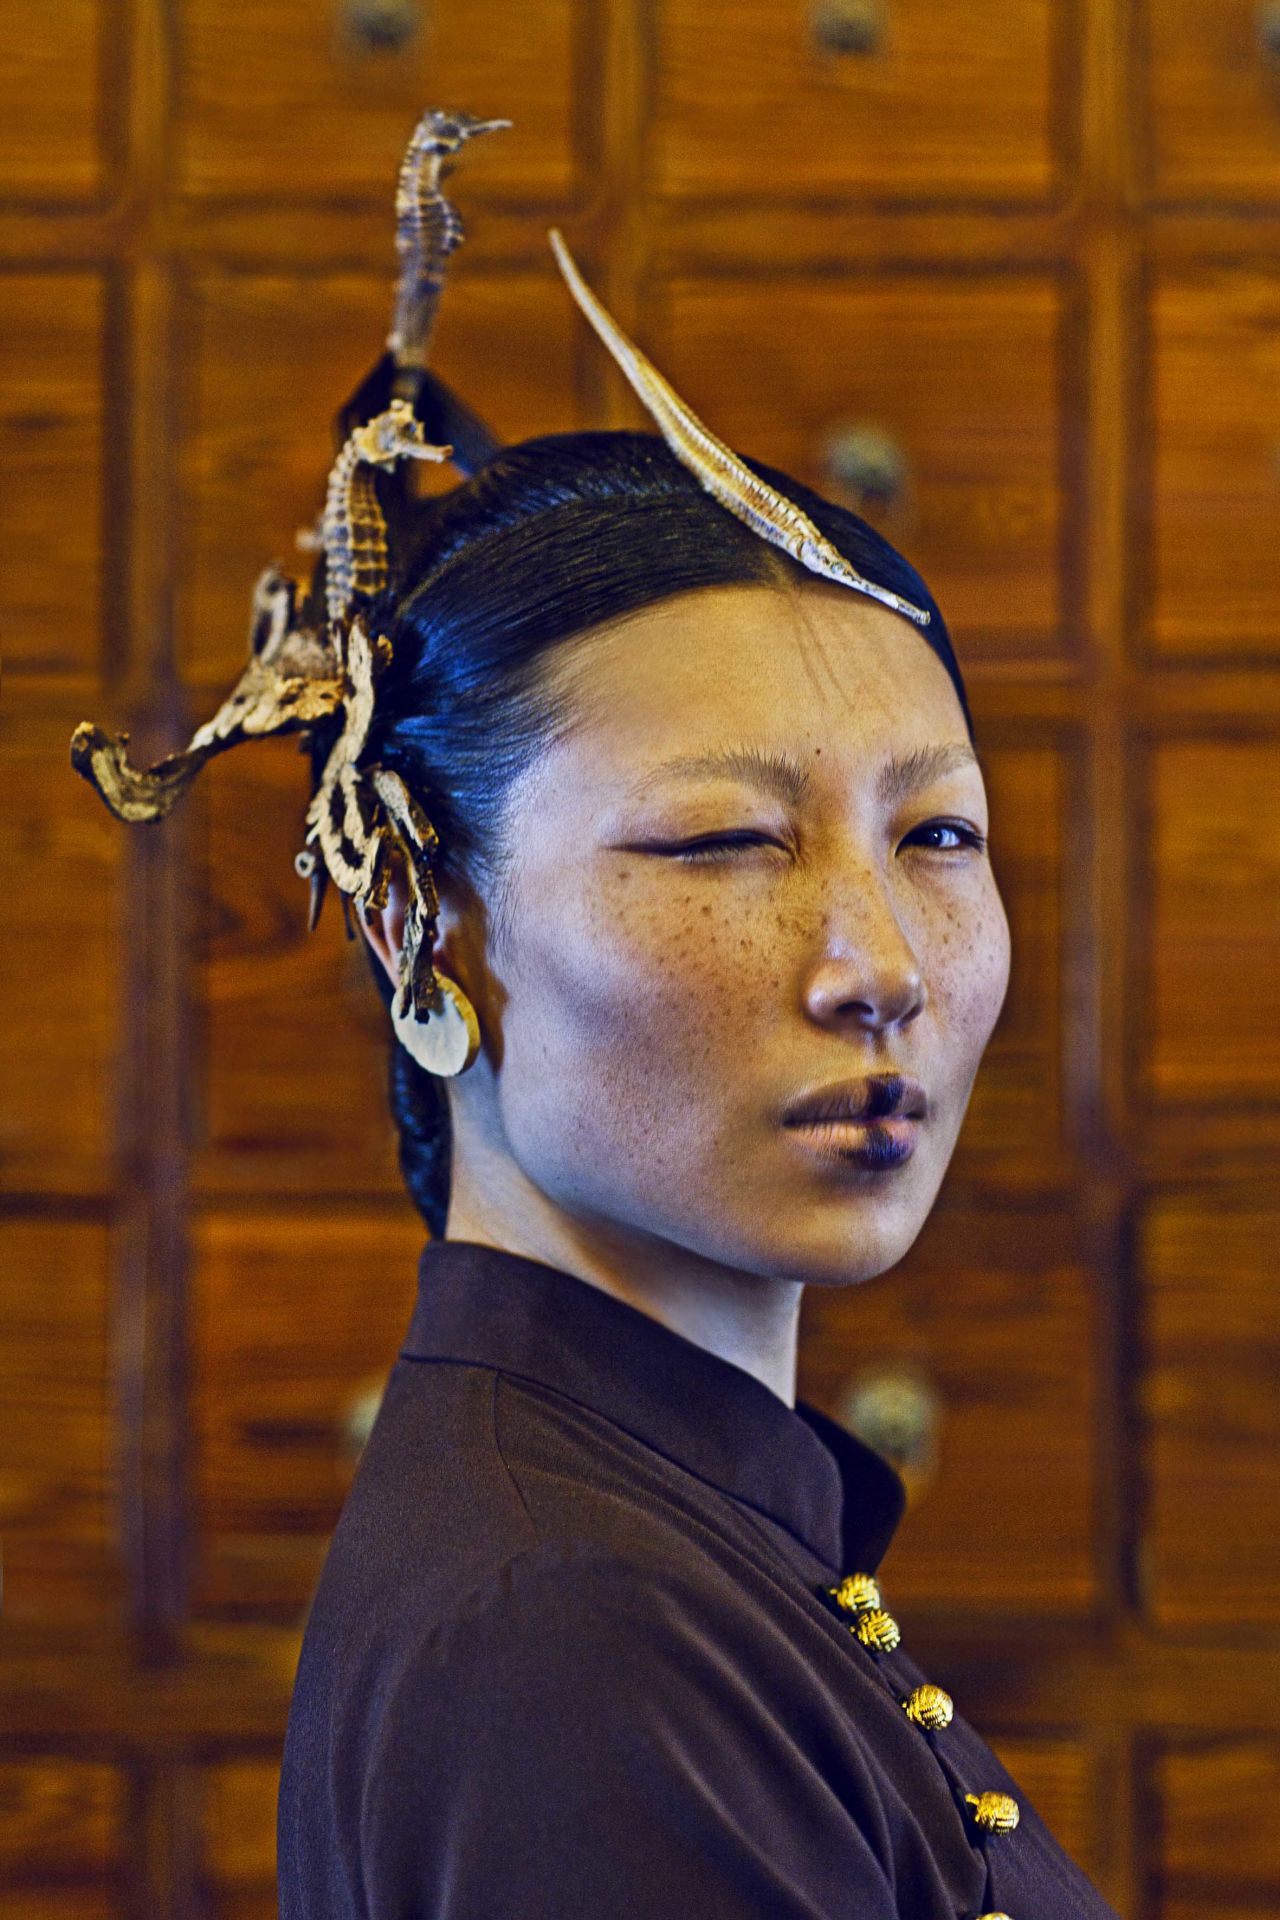 Chinese photographer Chen Man shot this portrait, entitled "Chinese Medicine" in 2012 for i.D. The series depicted China's ethnic minorities.